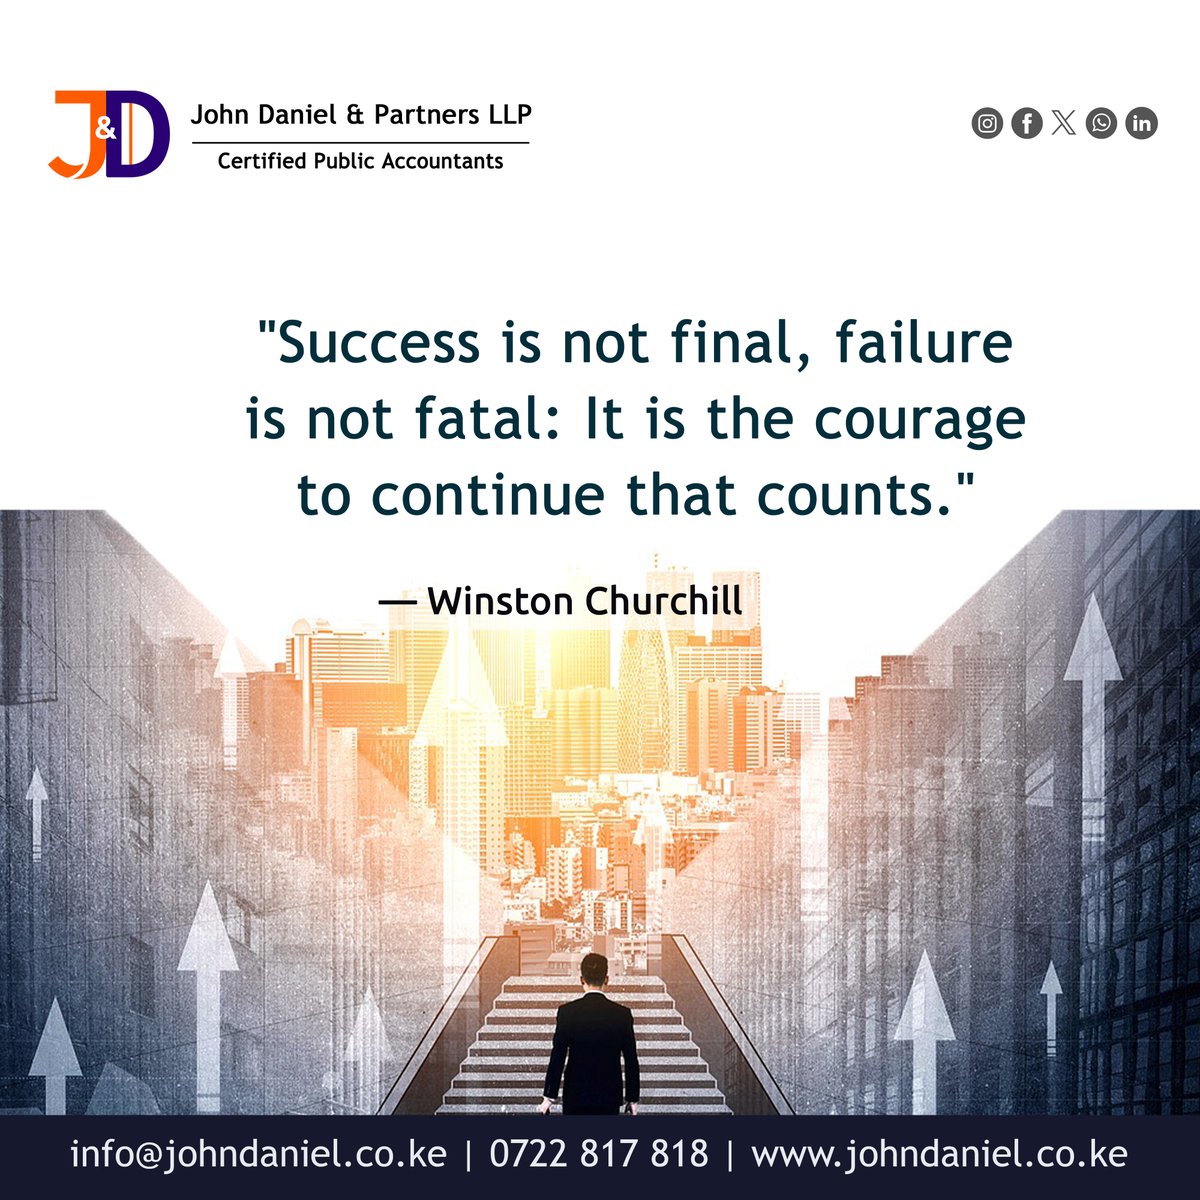 “Success is not final, failure is not fatal: It is the courage to continue that counts” — Winston Churchill

Have a successful week!

Accounting | Tax | Audit | Advisory

#BusinessSucess #SMEs #BusinessGrowth #Accounting #Audit #BusinessAdvisory